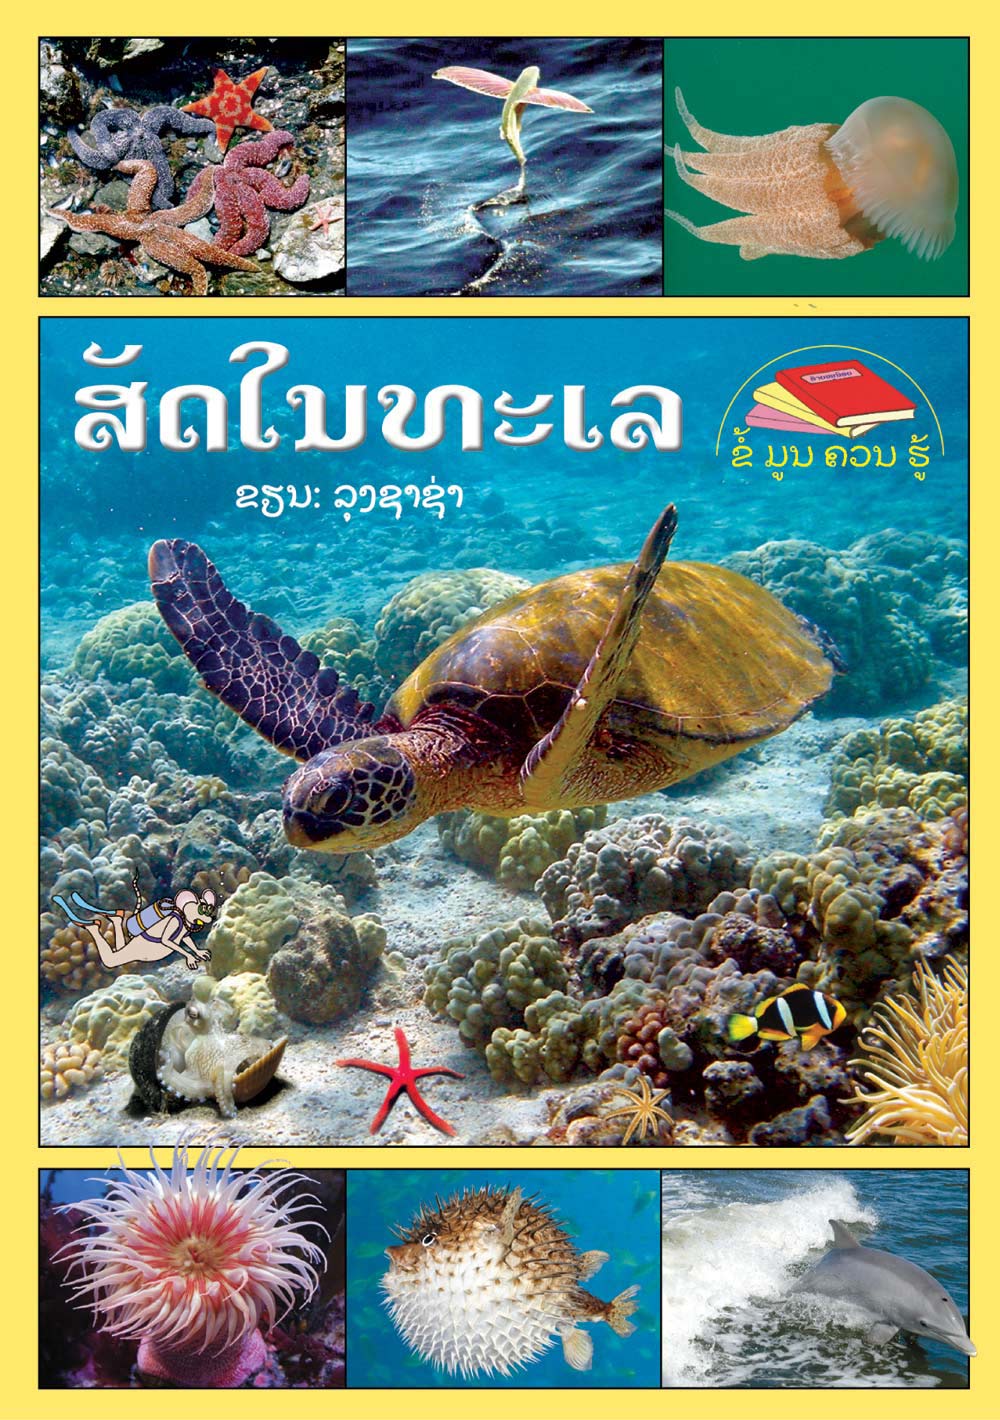 Life in the Sea large book cover, published in Lao language